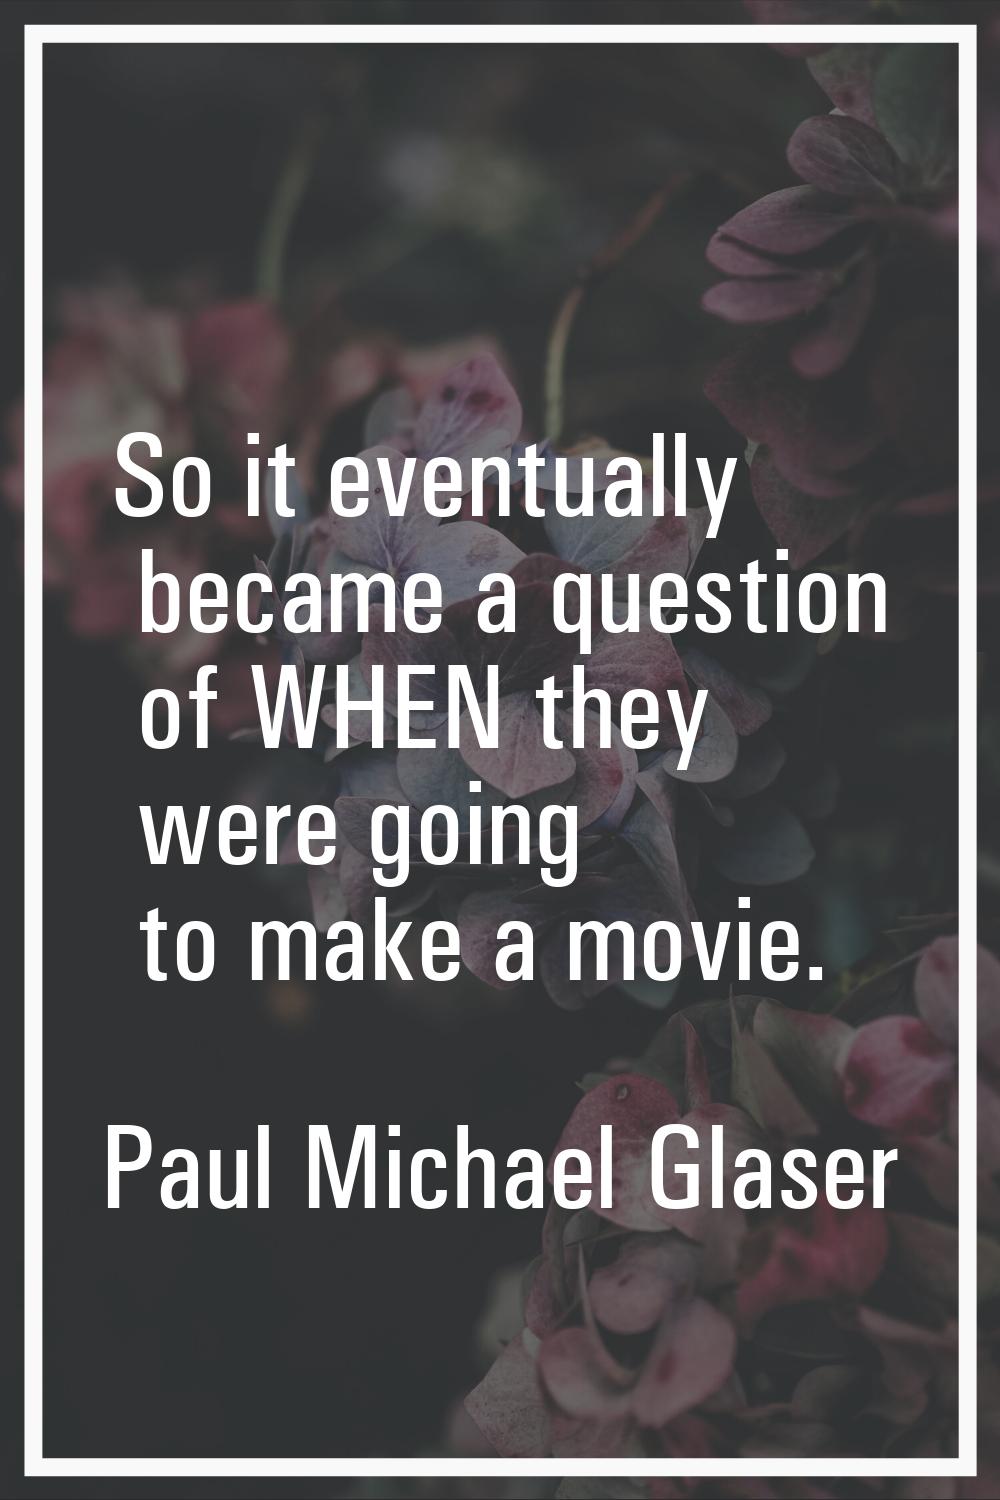 So it eventually became a question of WHEN they were going to make a movie.